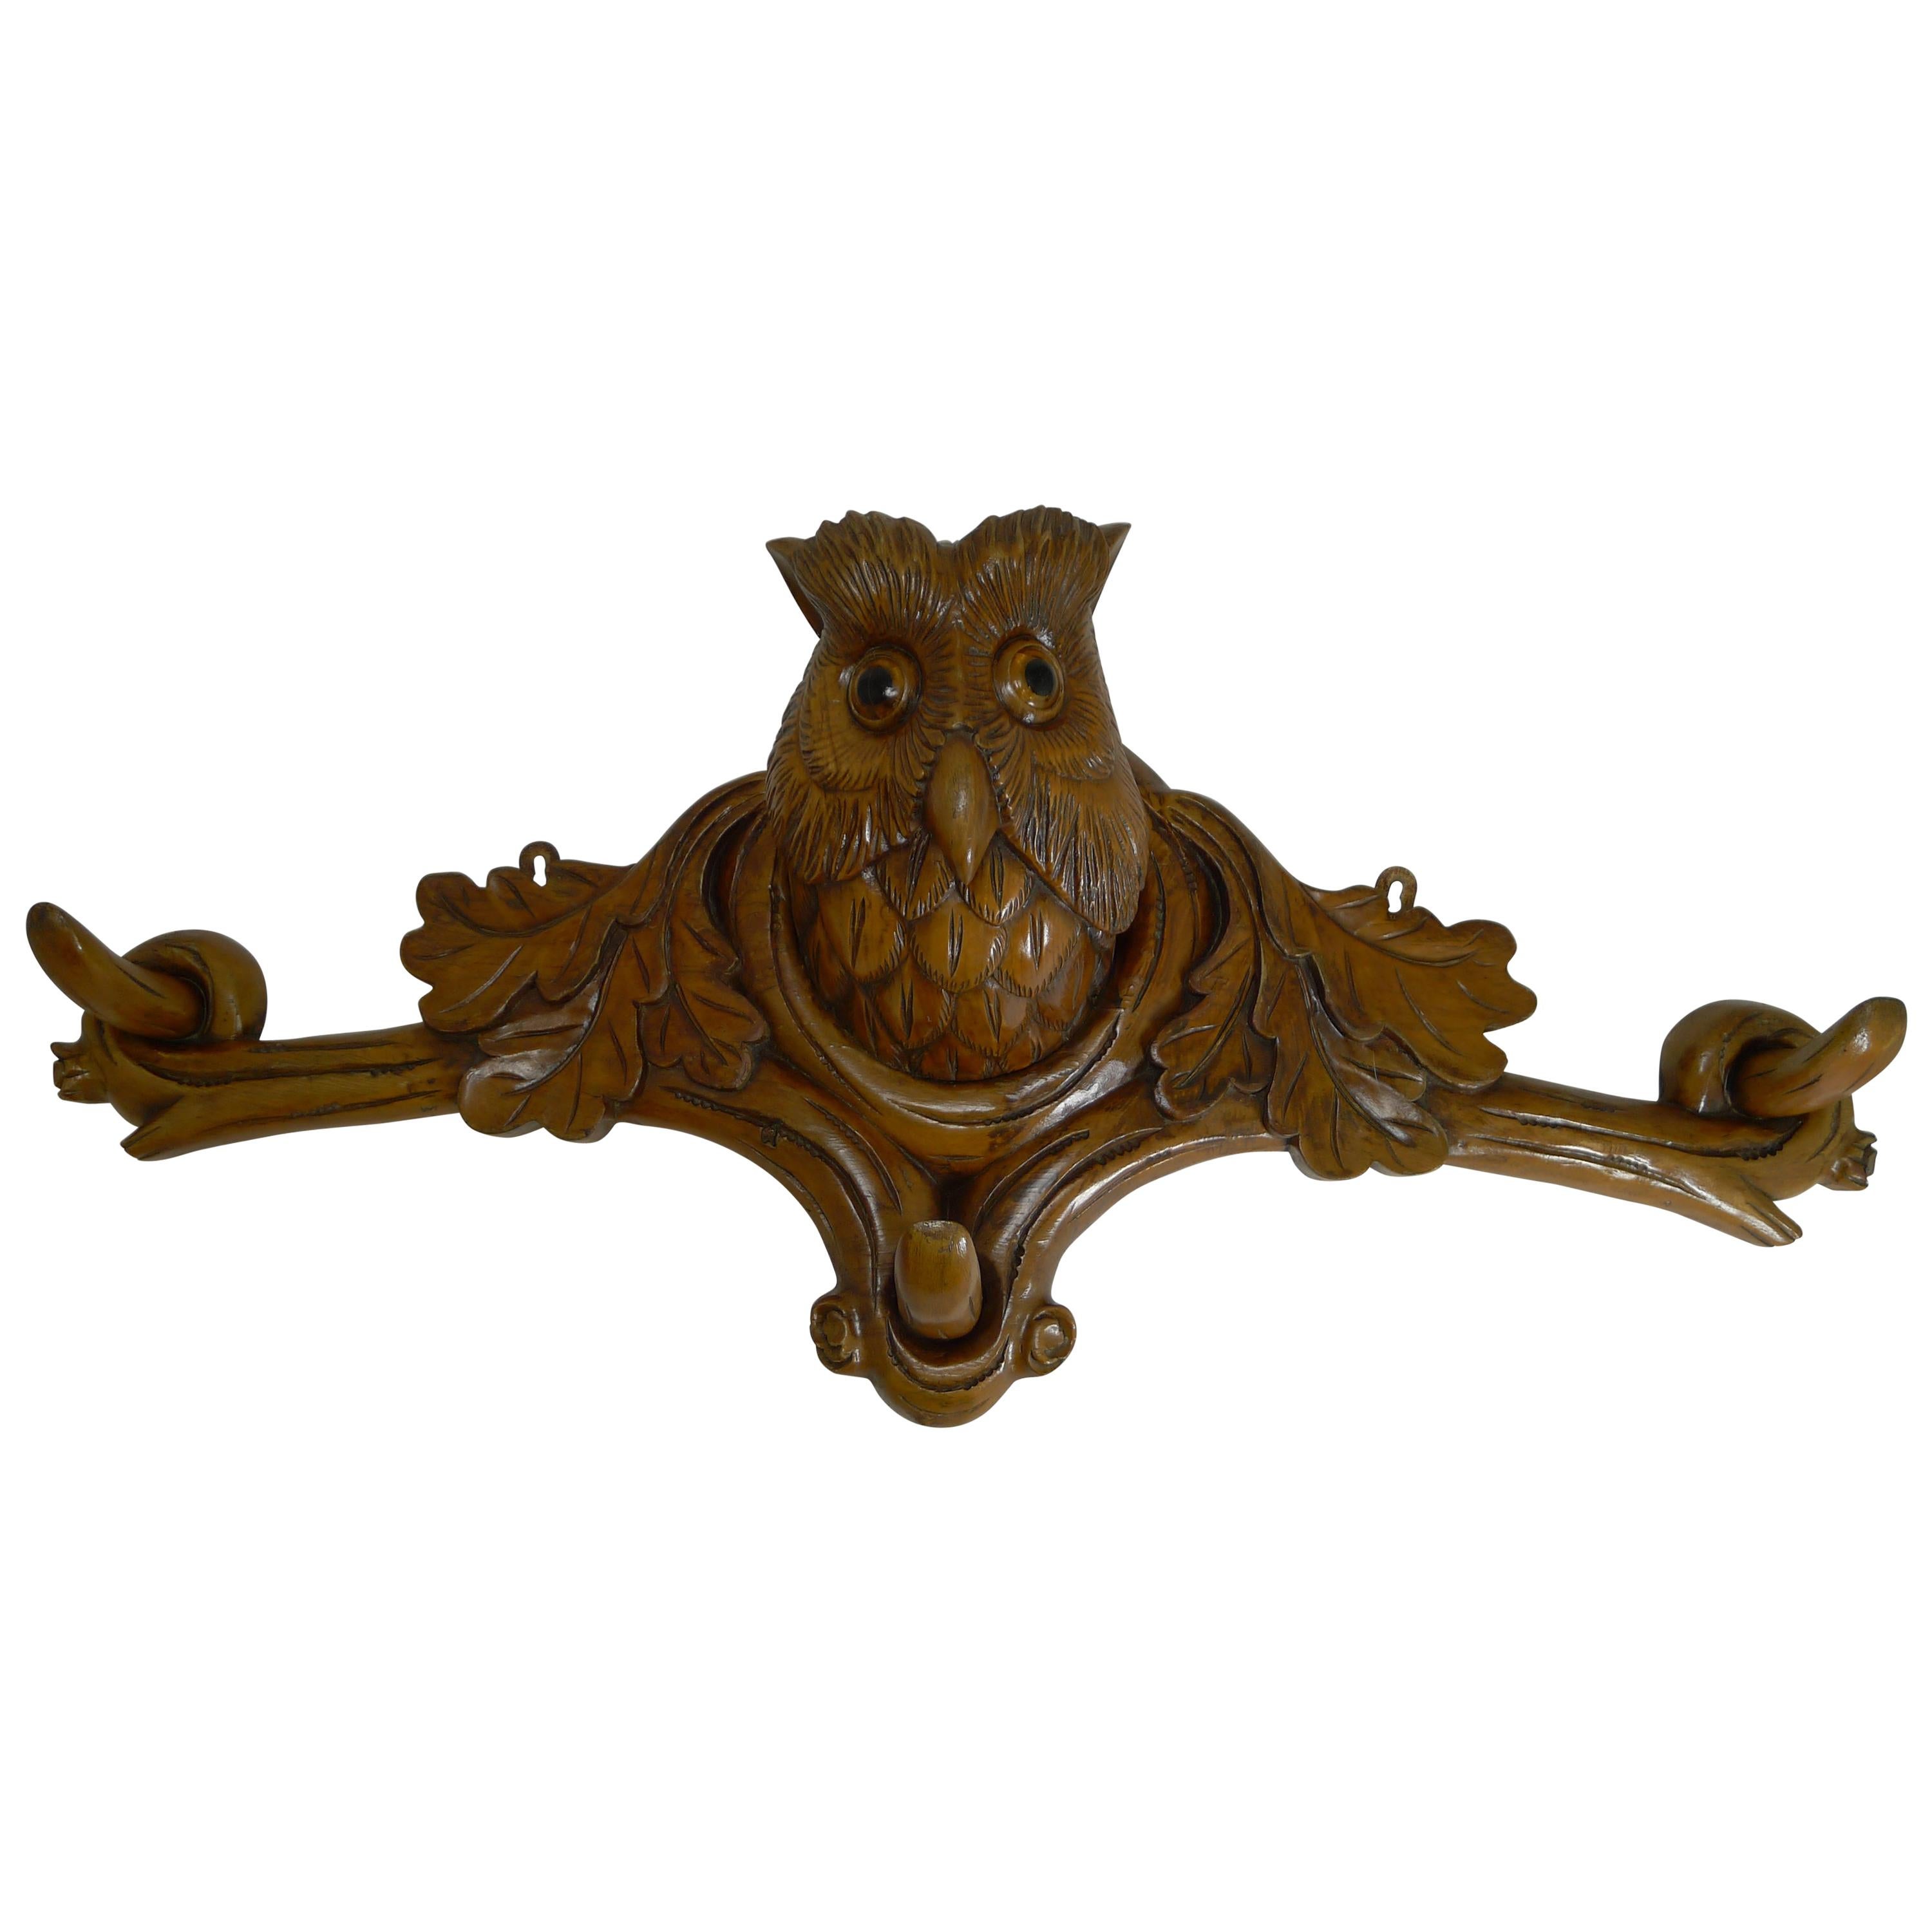 Grand Black Forest Hat Stand - Owl with Glass Eyes, circa 1890